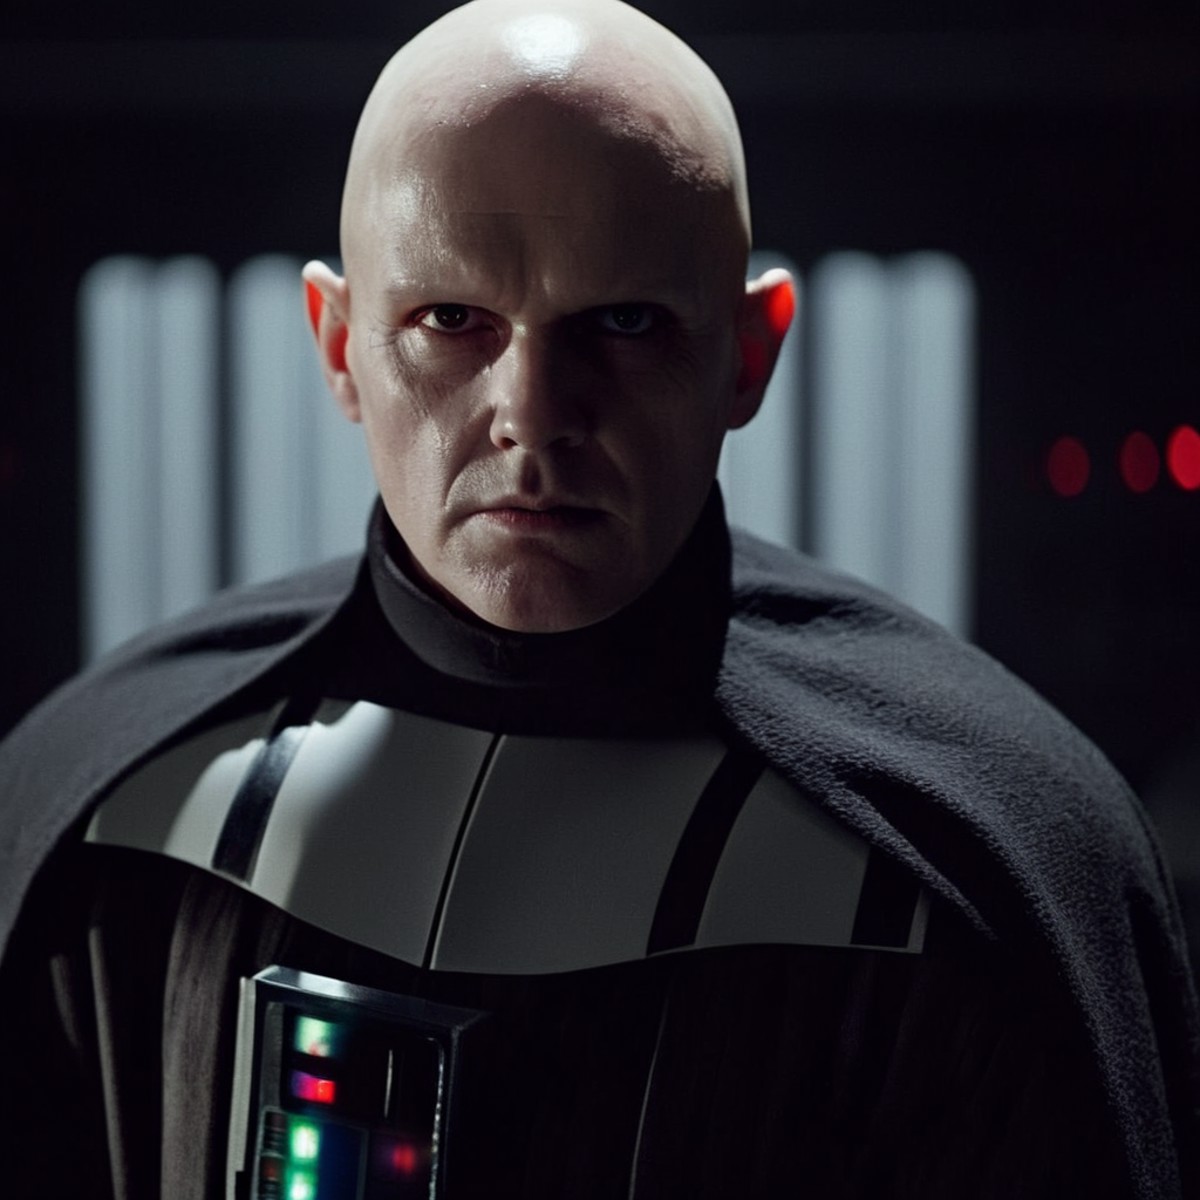 cinematic film still of  <lora:Darth Vader:1.5>
Darth Vader a bald creepy shiny eyes man with white face and scars dressed...